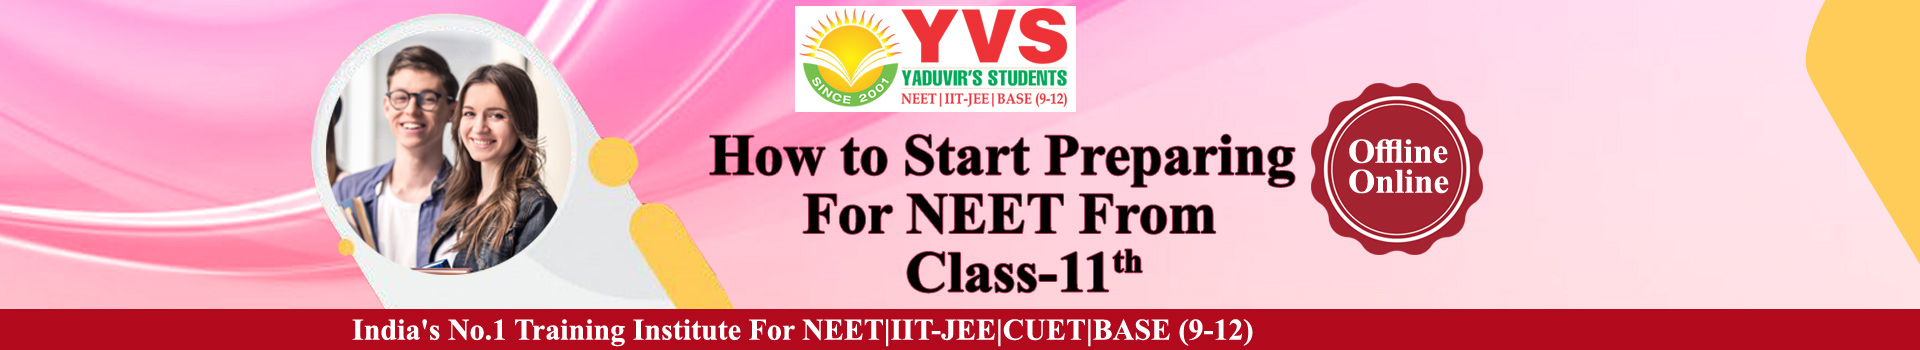 HOW TO START PREPARING FOR NEET FROM CLASS 11